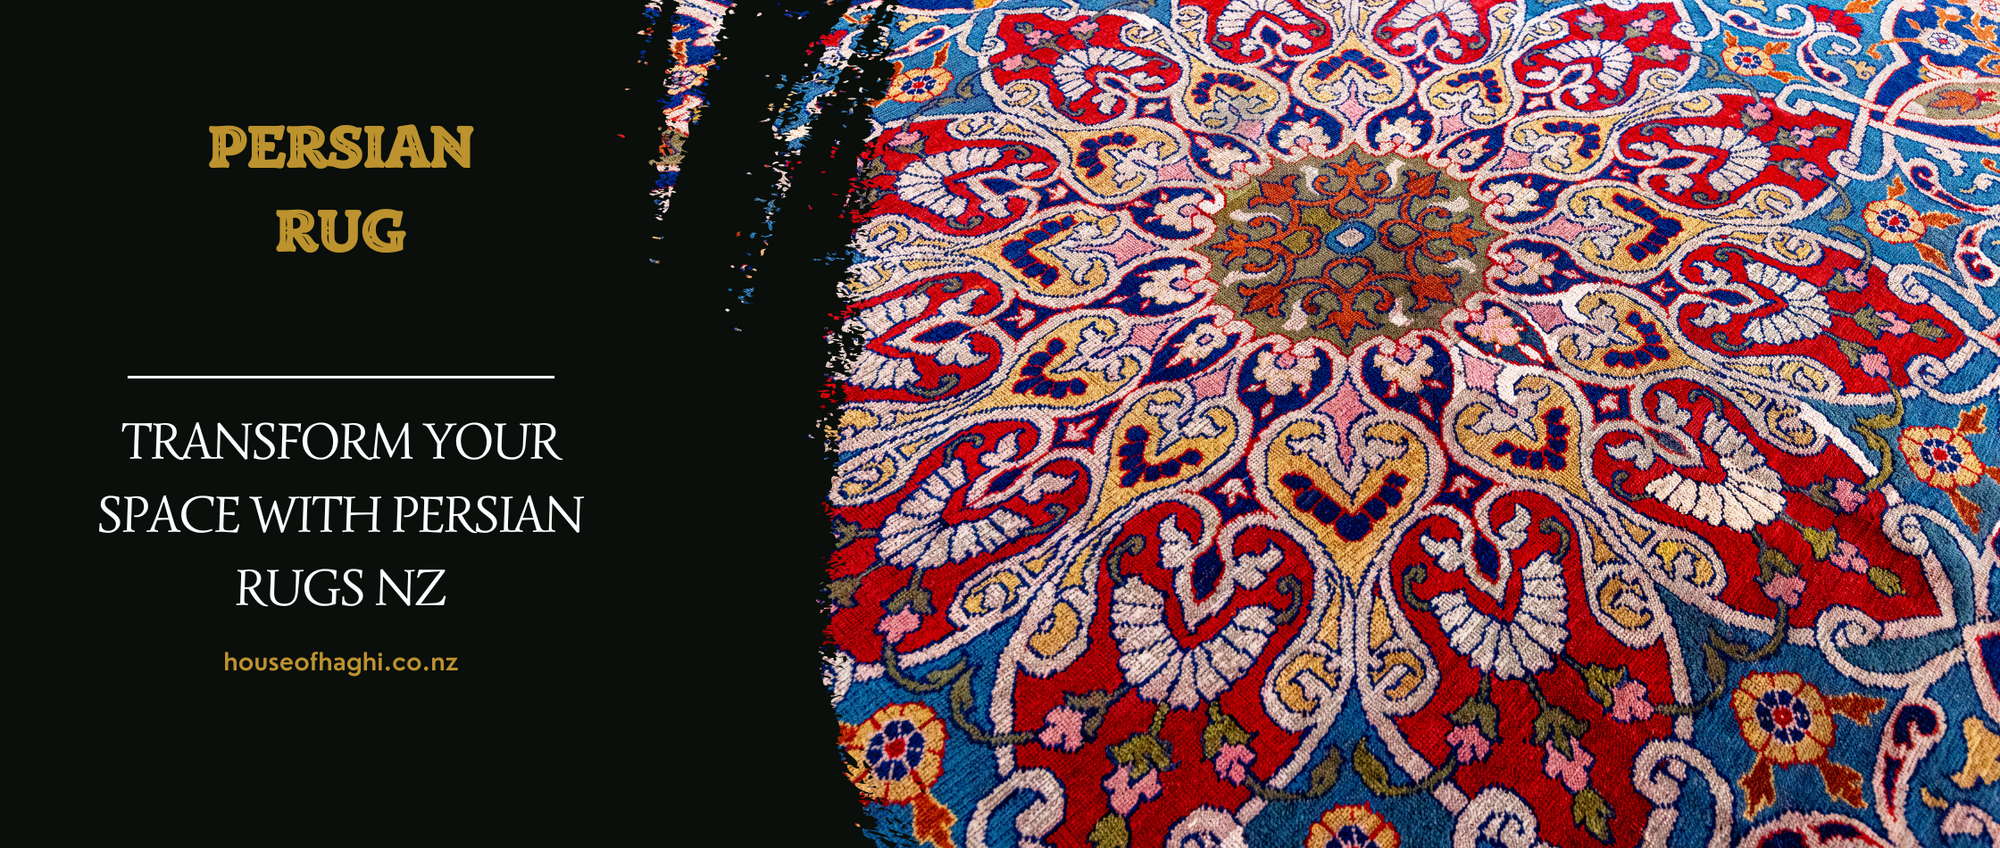 Transform Your Space with Persian Rugs NZ